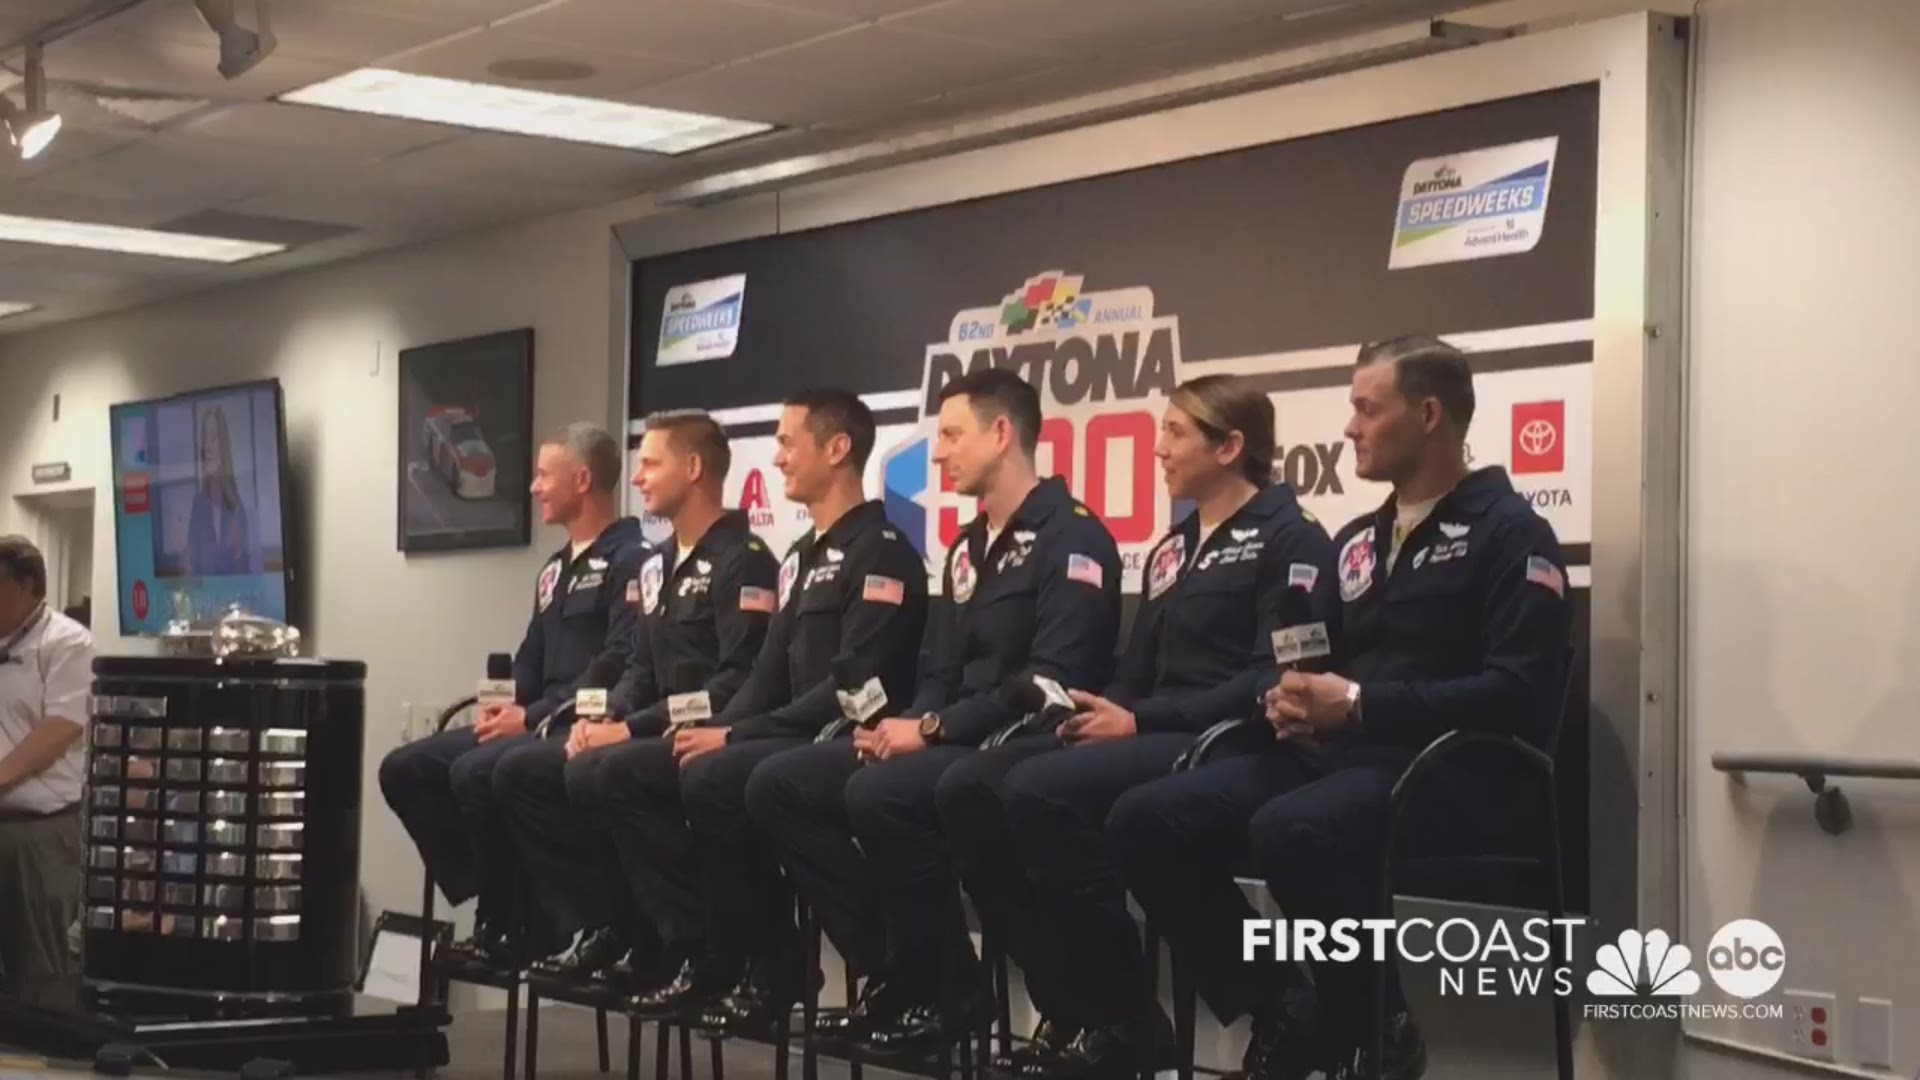 They're in town to assist with the Daytona 500 but the AF Thunderbirds hosted Jaguars QB Gardner Minshew a few weeks ago.